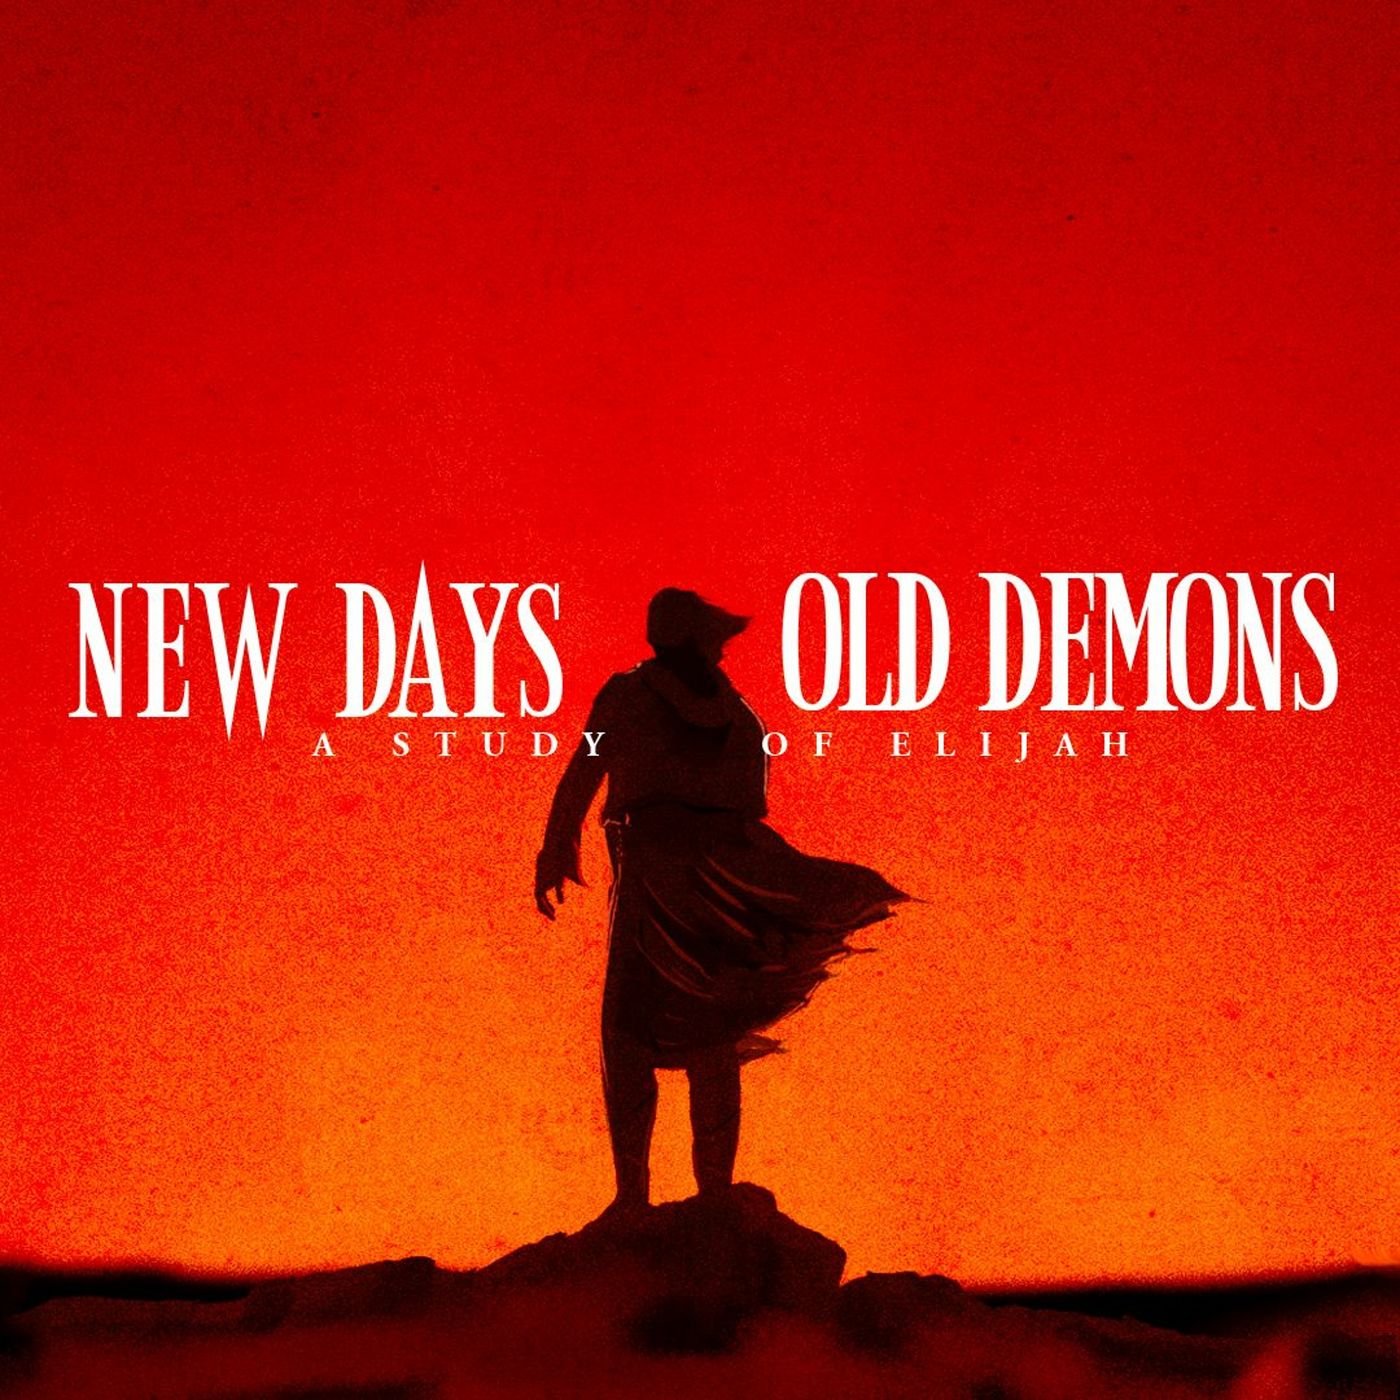 Chapter 1: New Days, Old Demons